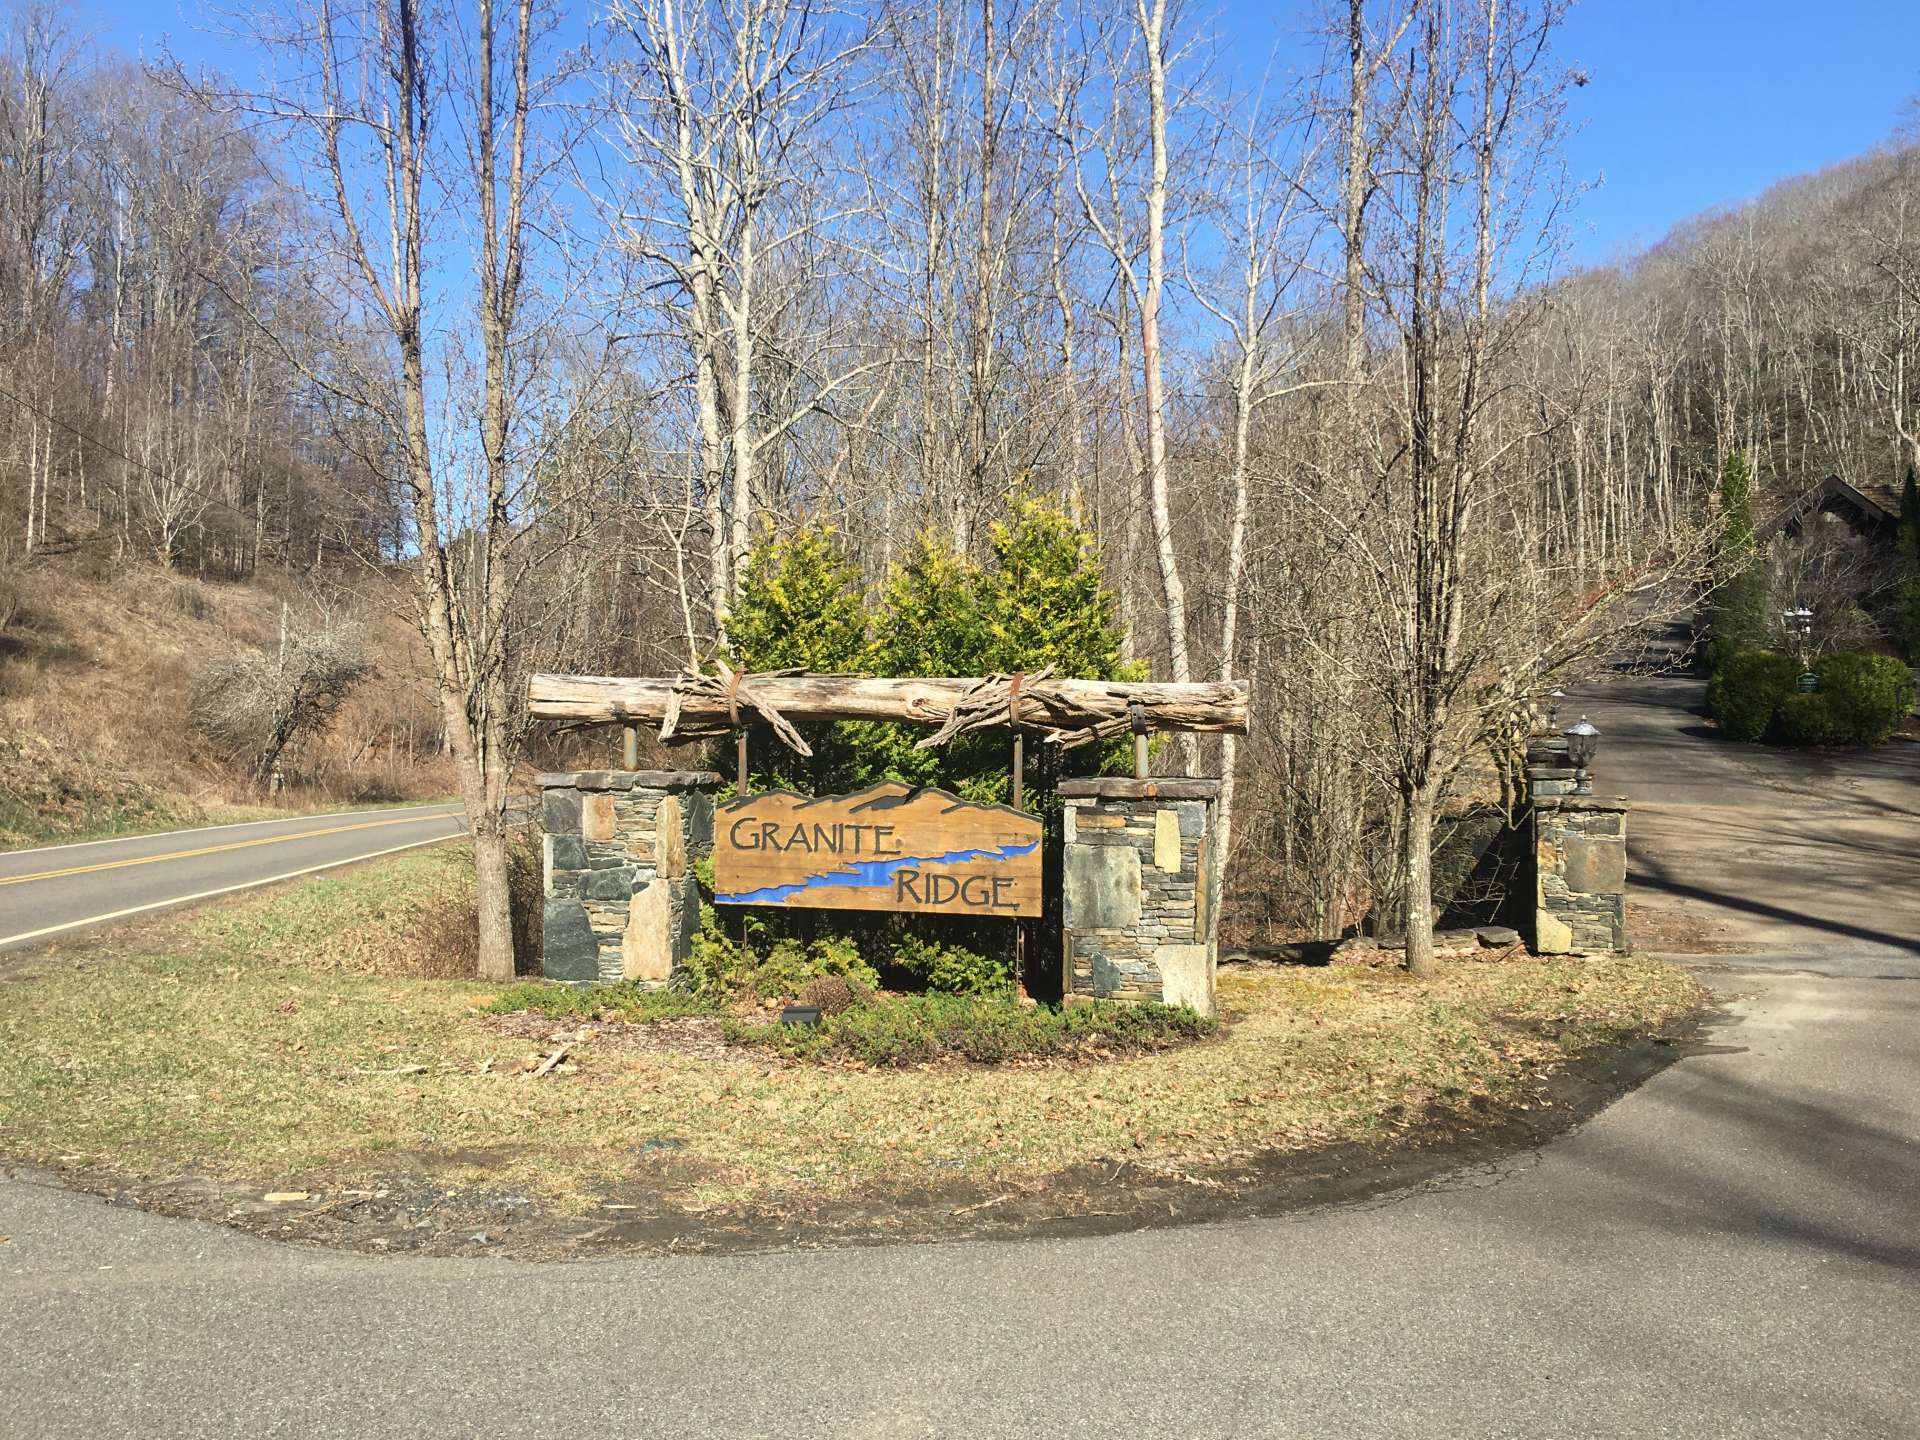 Welcome to Granite Ridge, an ideal choice for the construction of your NC Mountain retreat cabin or primary home.